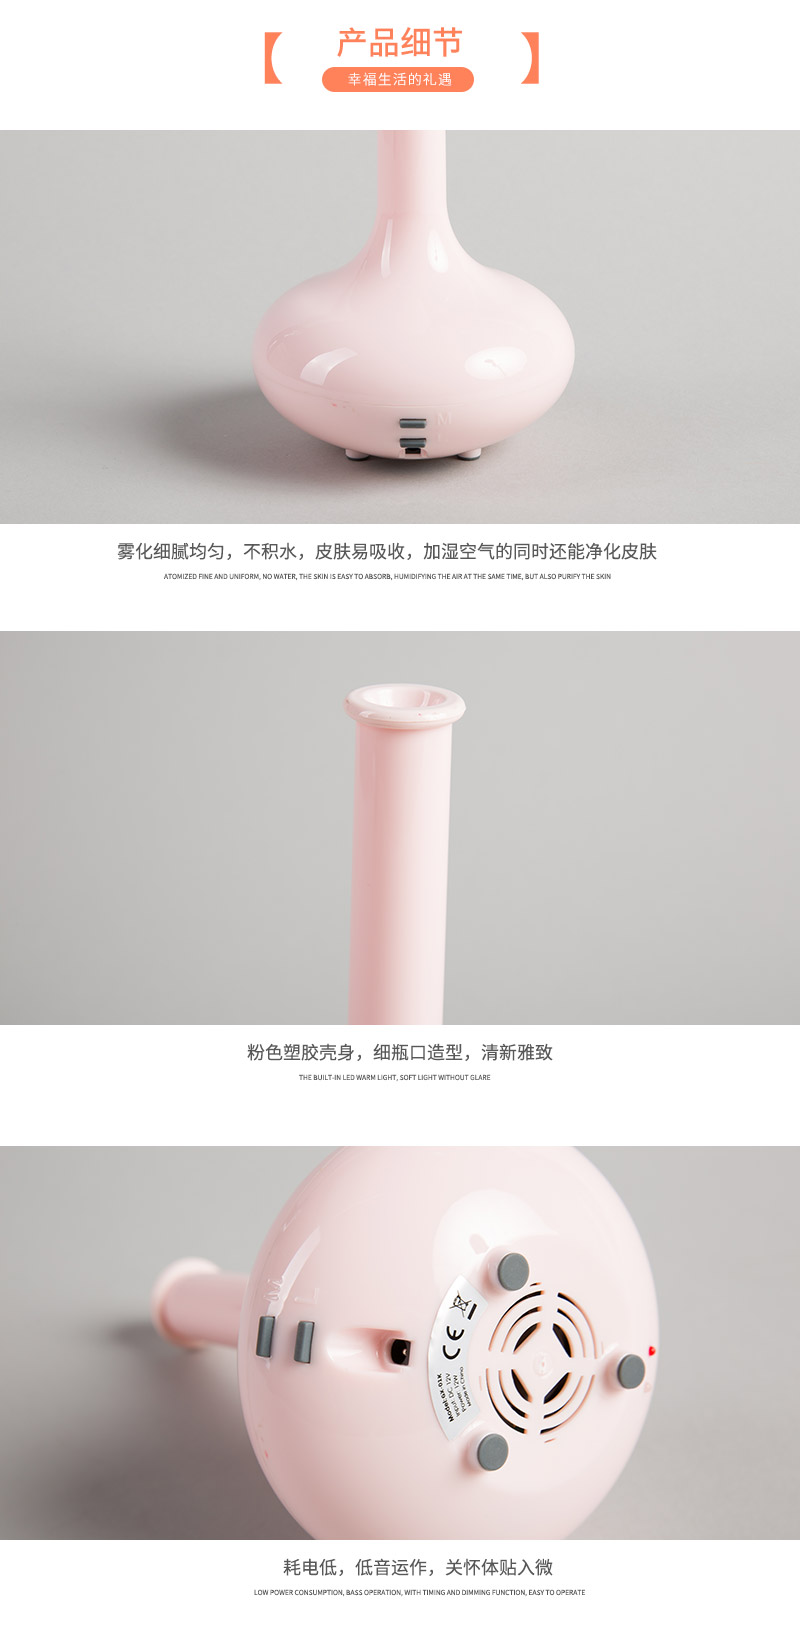 01K pink plastic home humidifier5